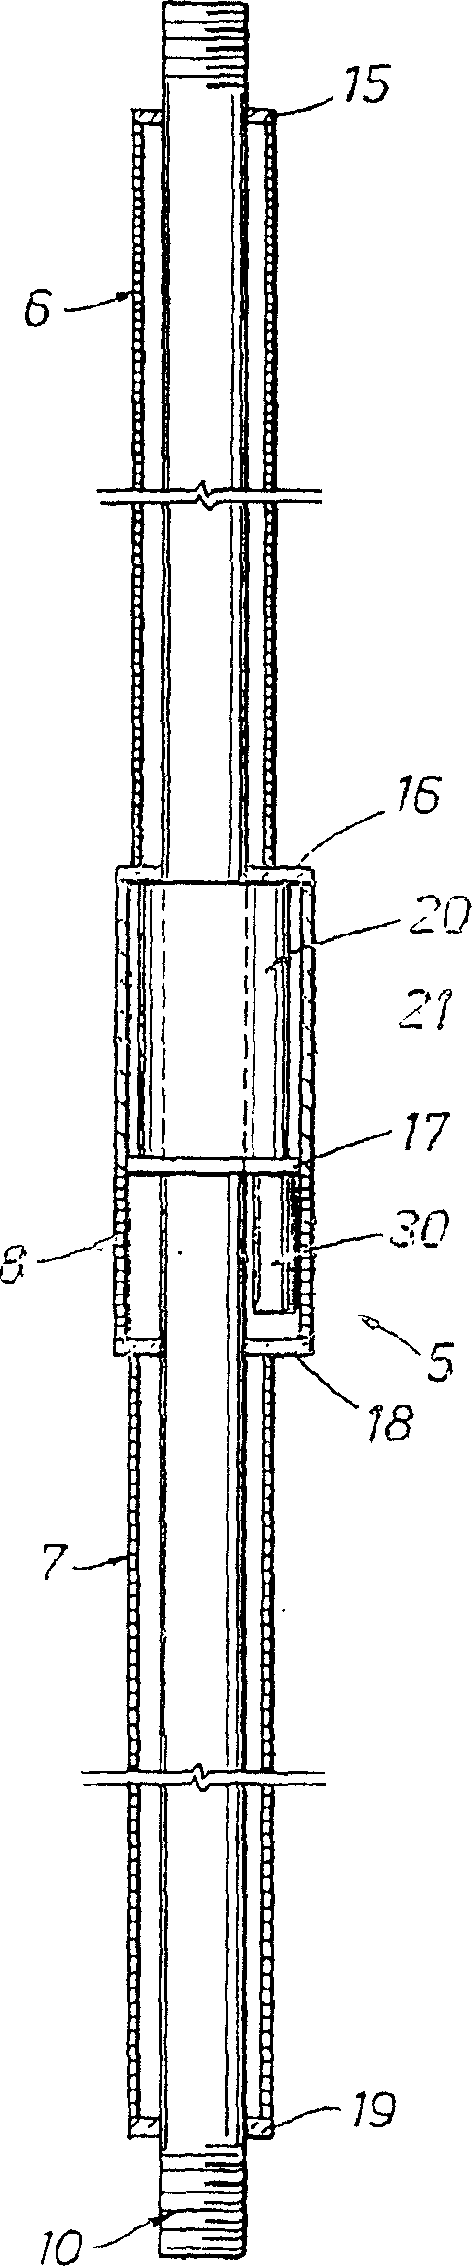 Surface flow controlled valve and screen